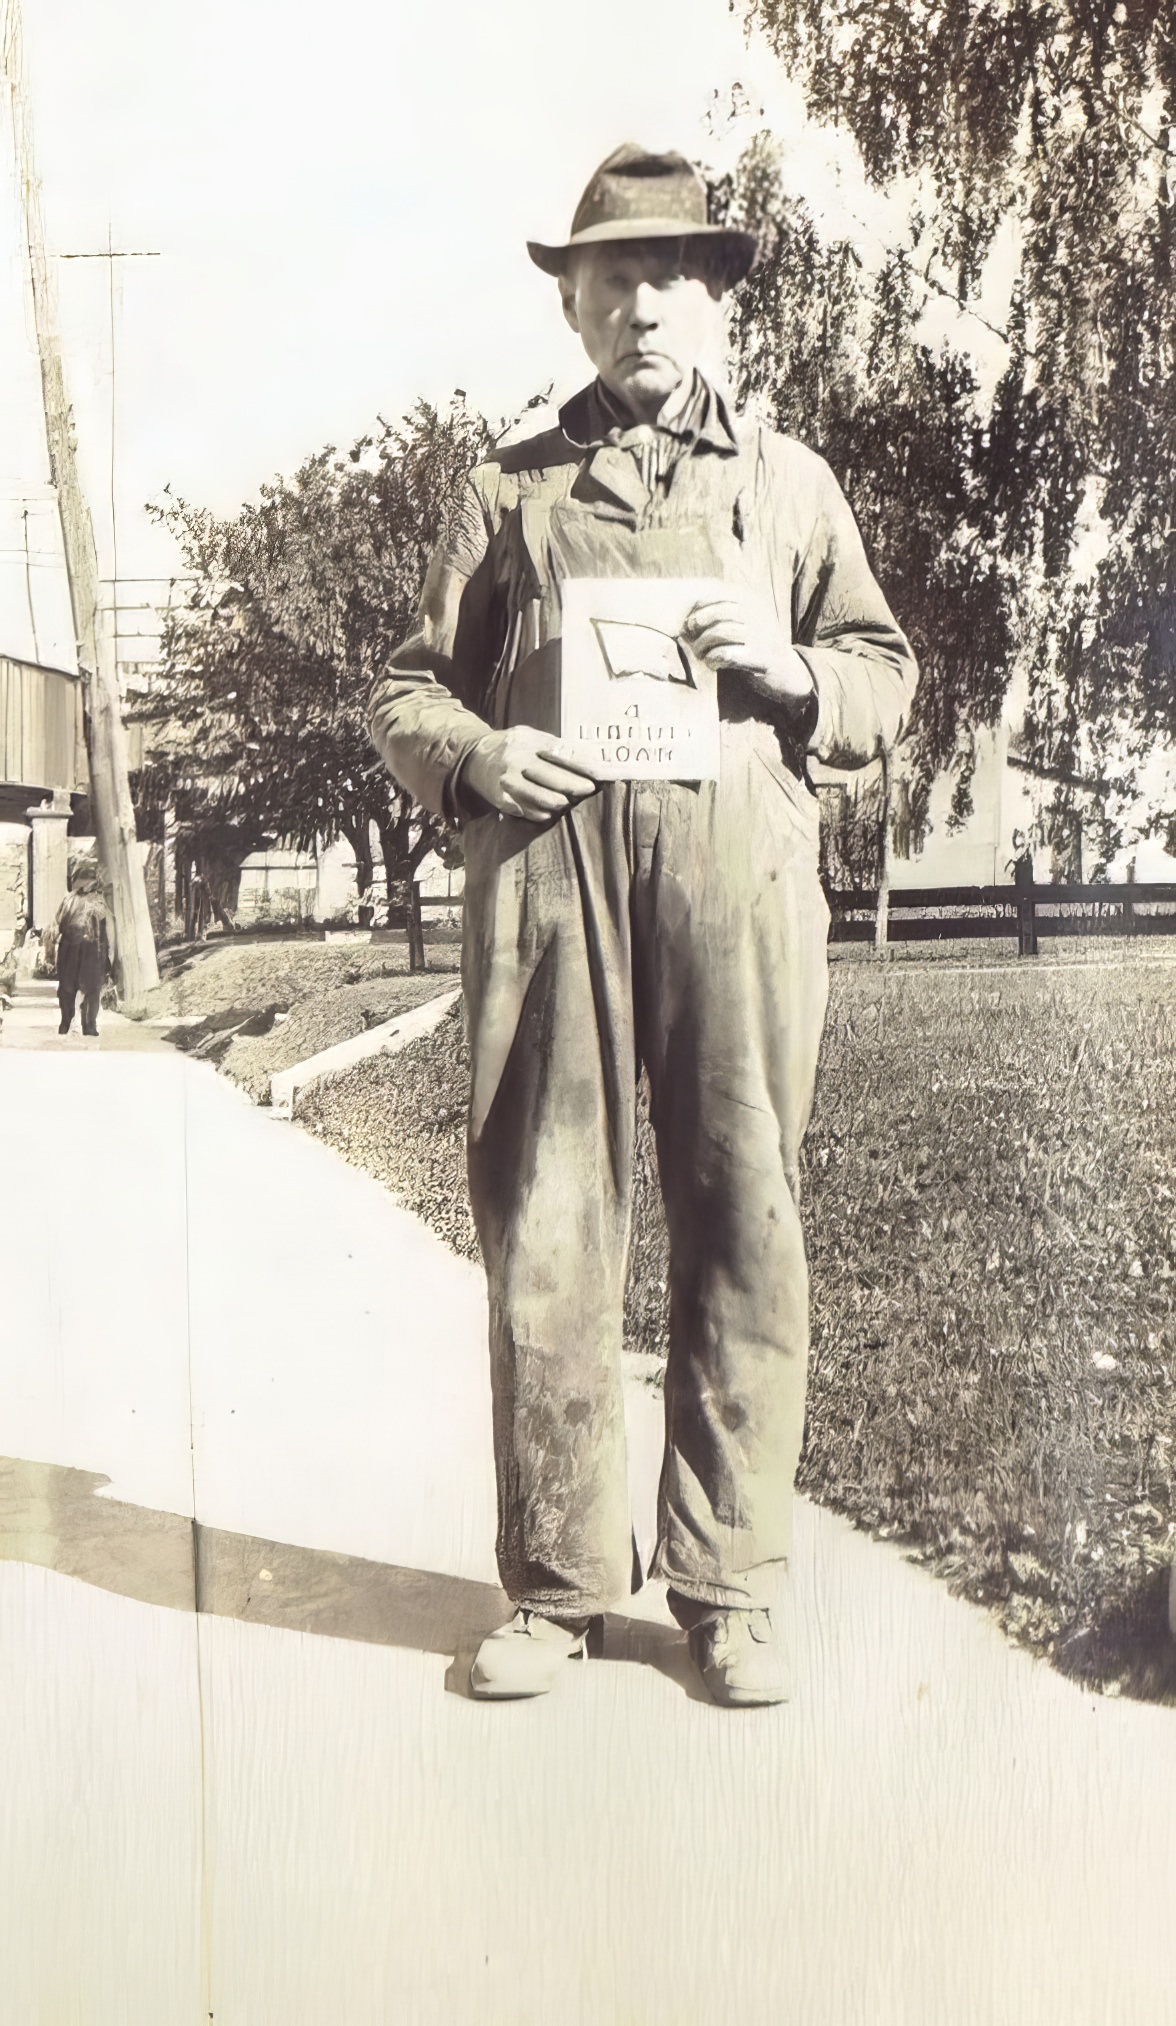 James Taney, a participant in the Liberty Bond campaign to support the Allies in World War I, standing near St. Patrick's Cemetery, Geneva, circa 1917